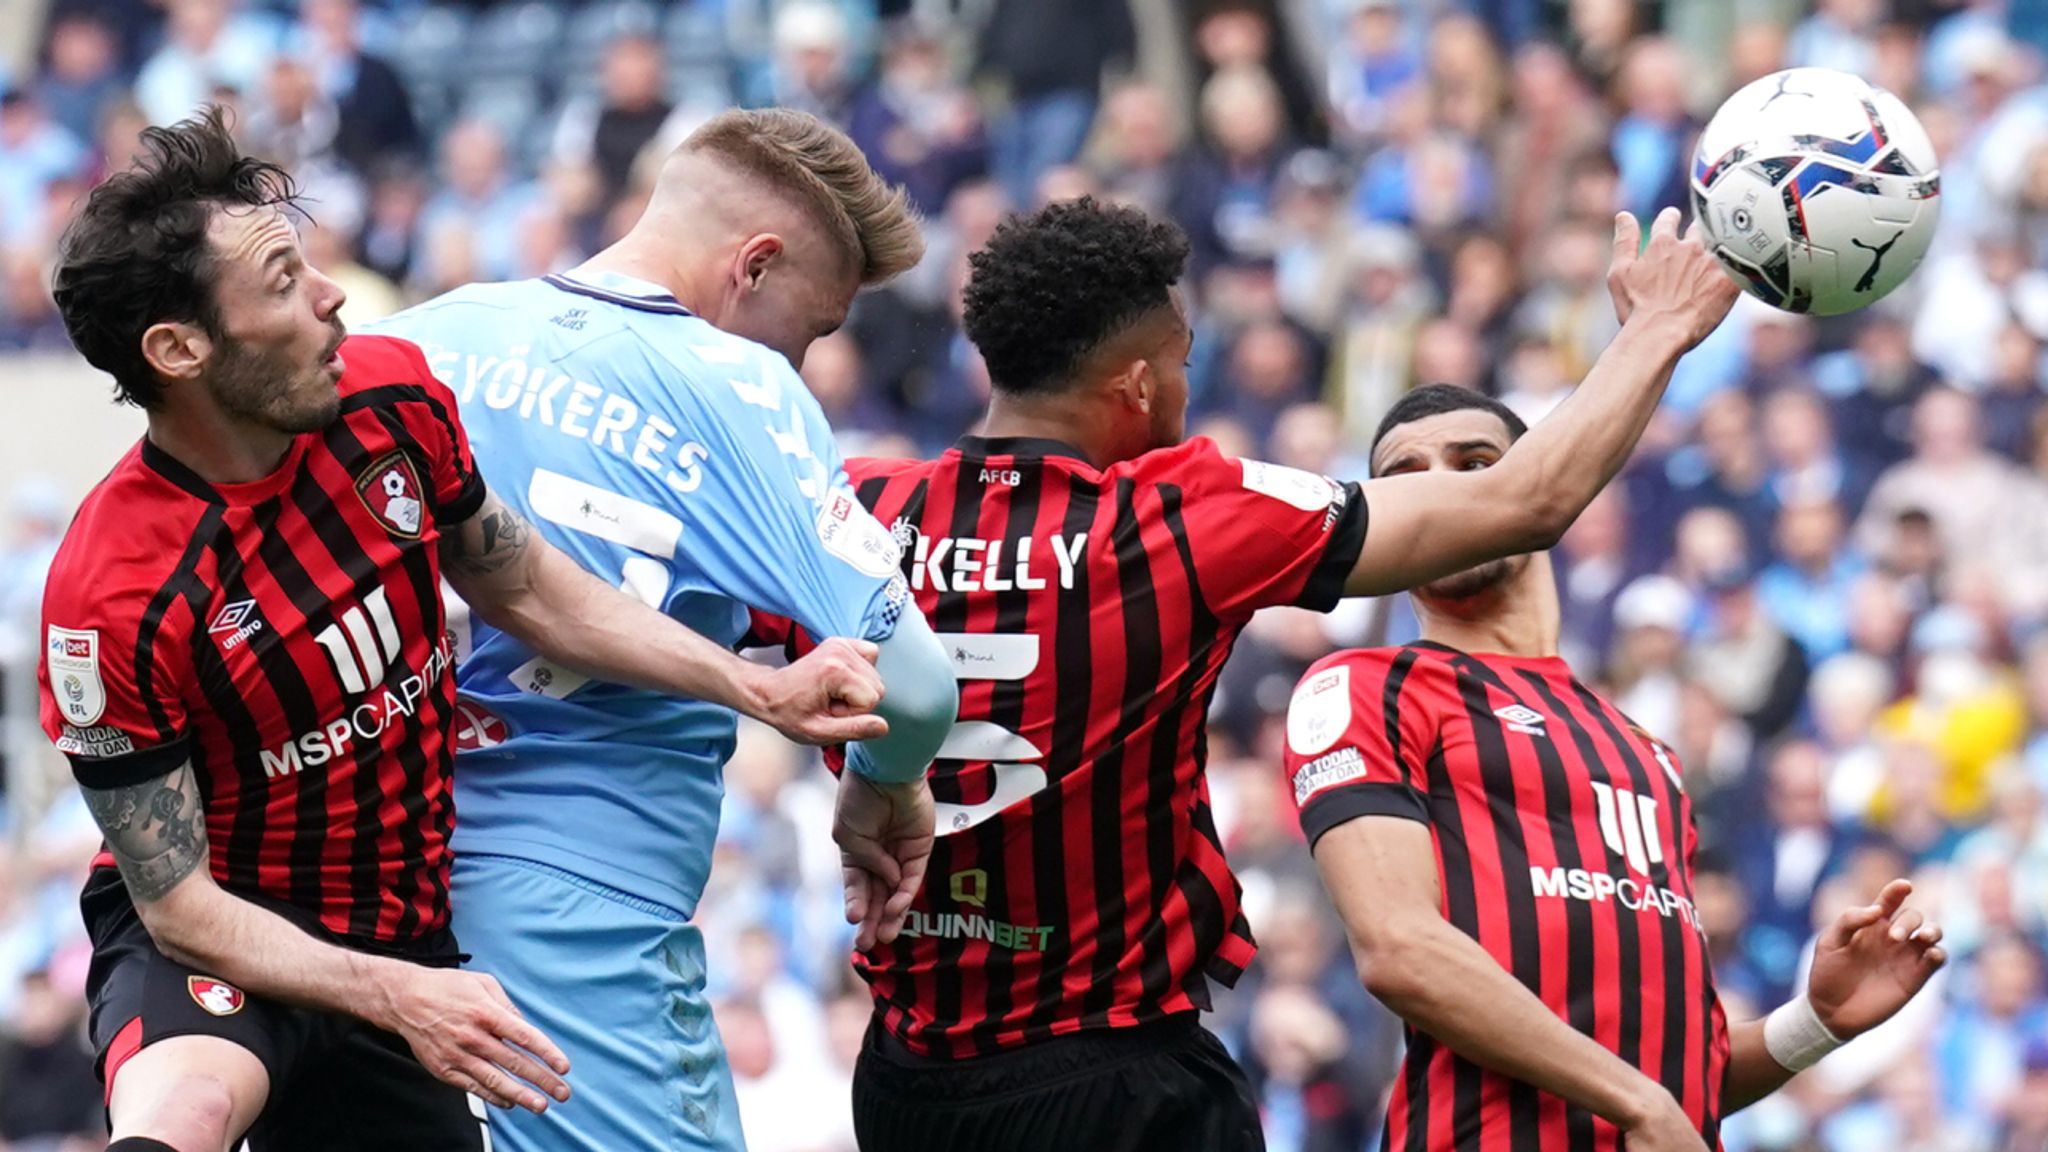 Still proud' - Coventry City sent heartfelt message after Bournemouth  defeat - CoventryLive